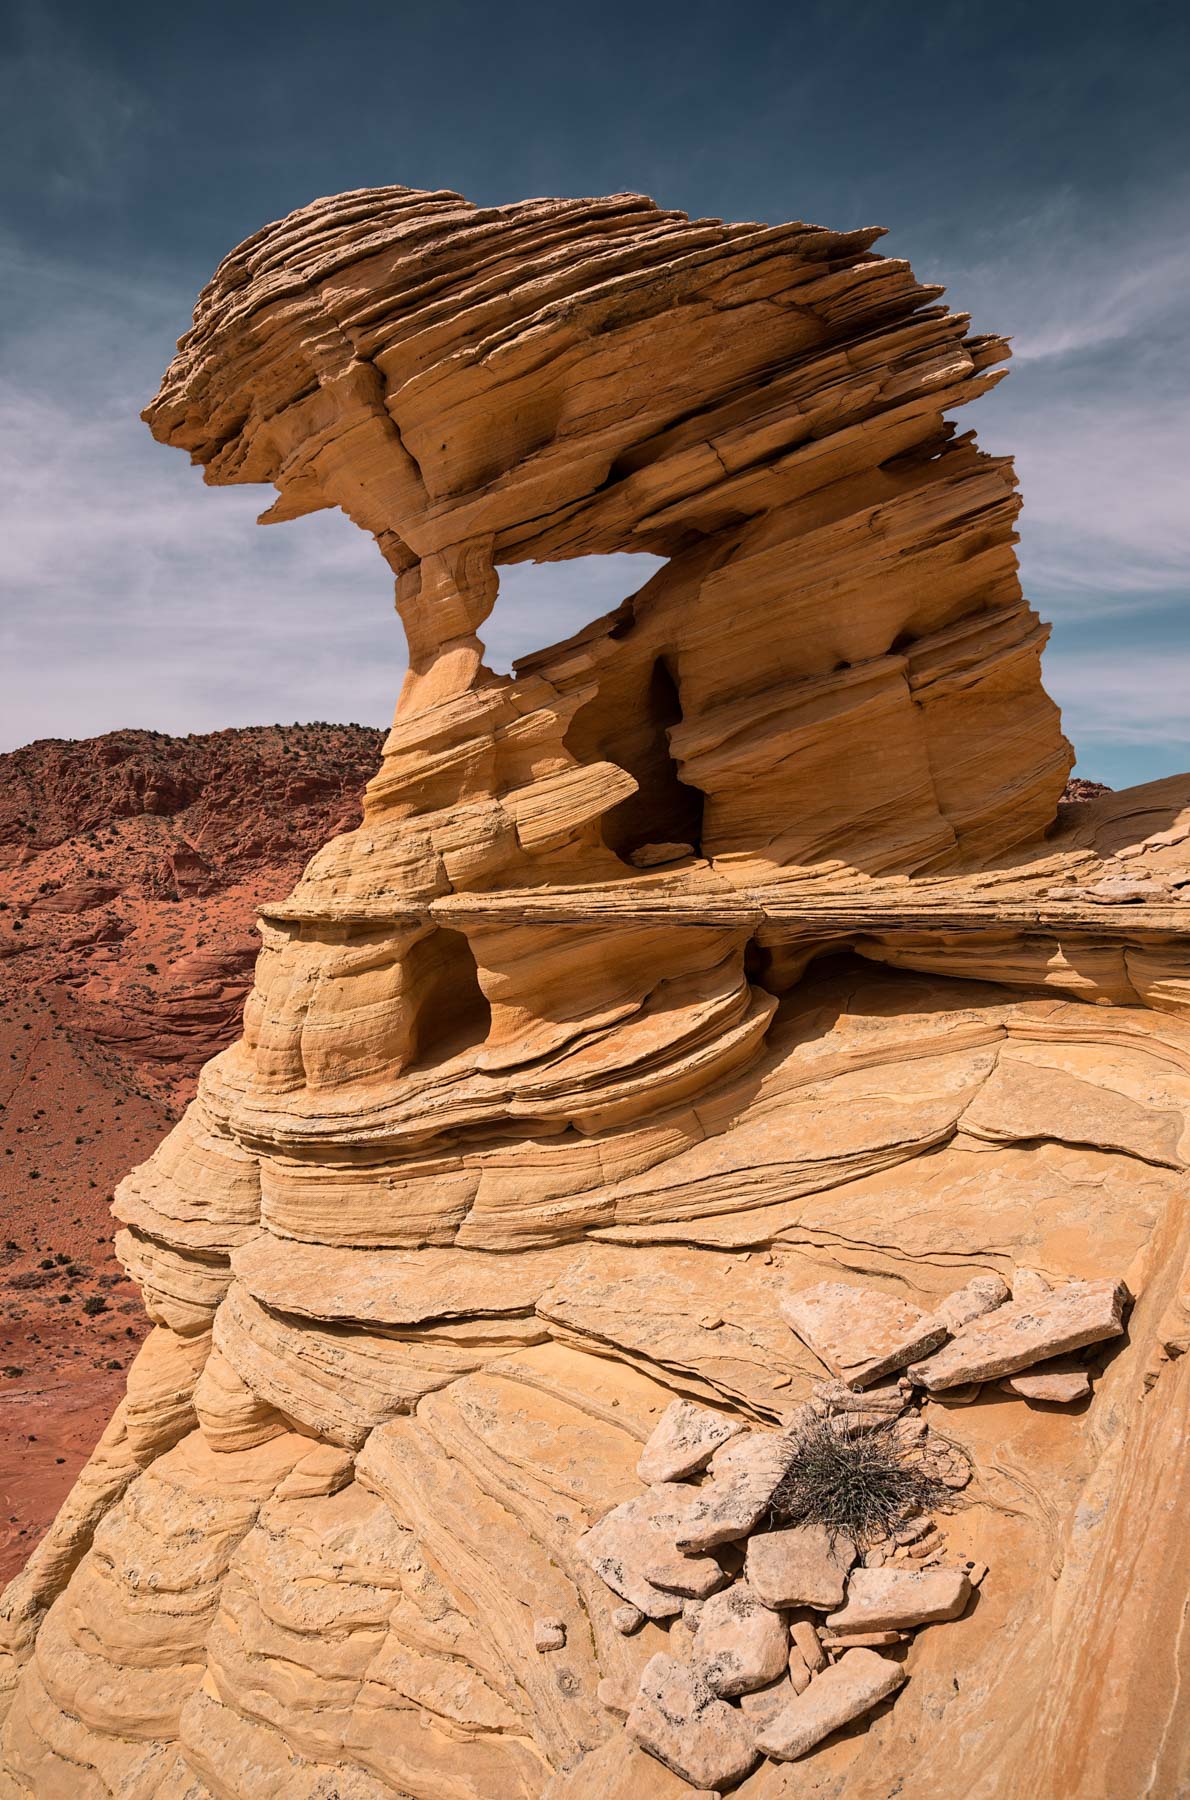 Hourglass Arch on Top Rock in Coyote Buttes North